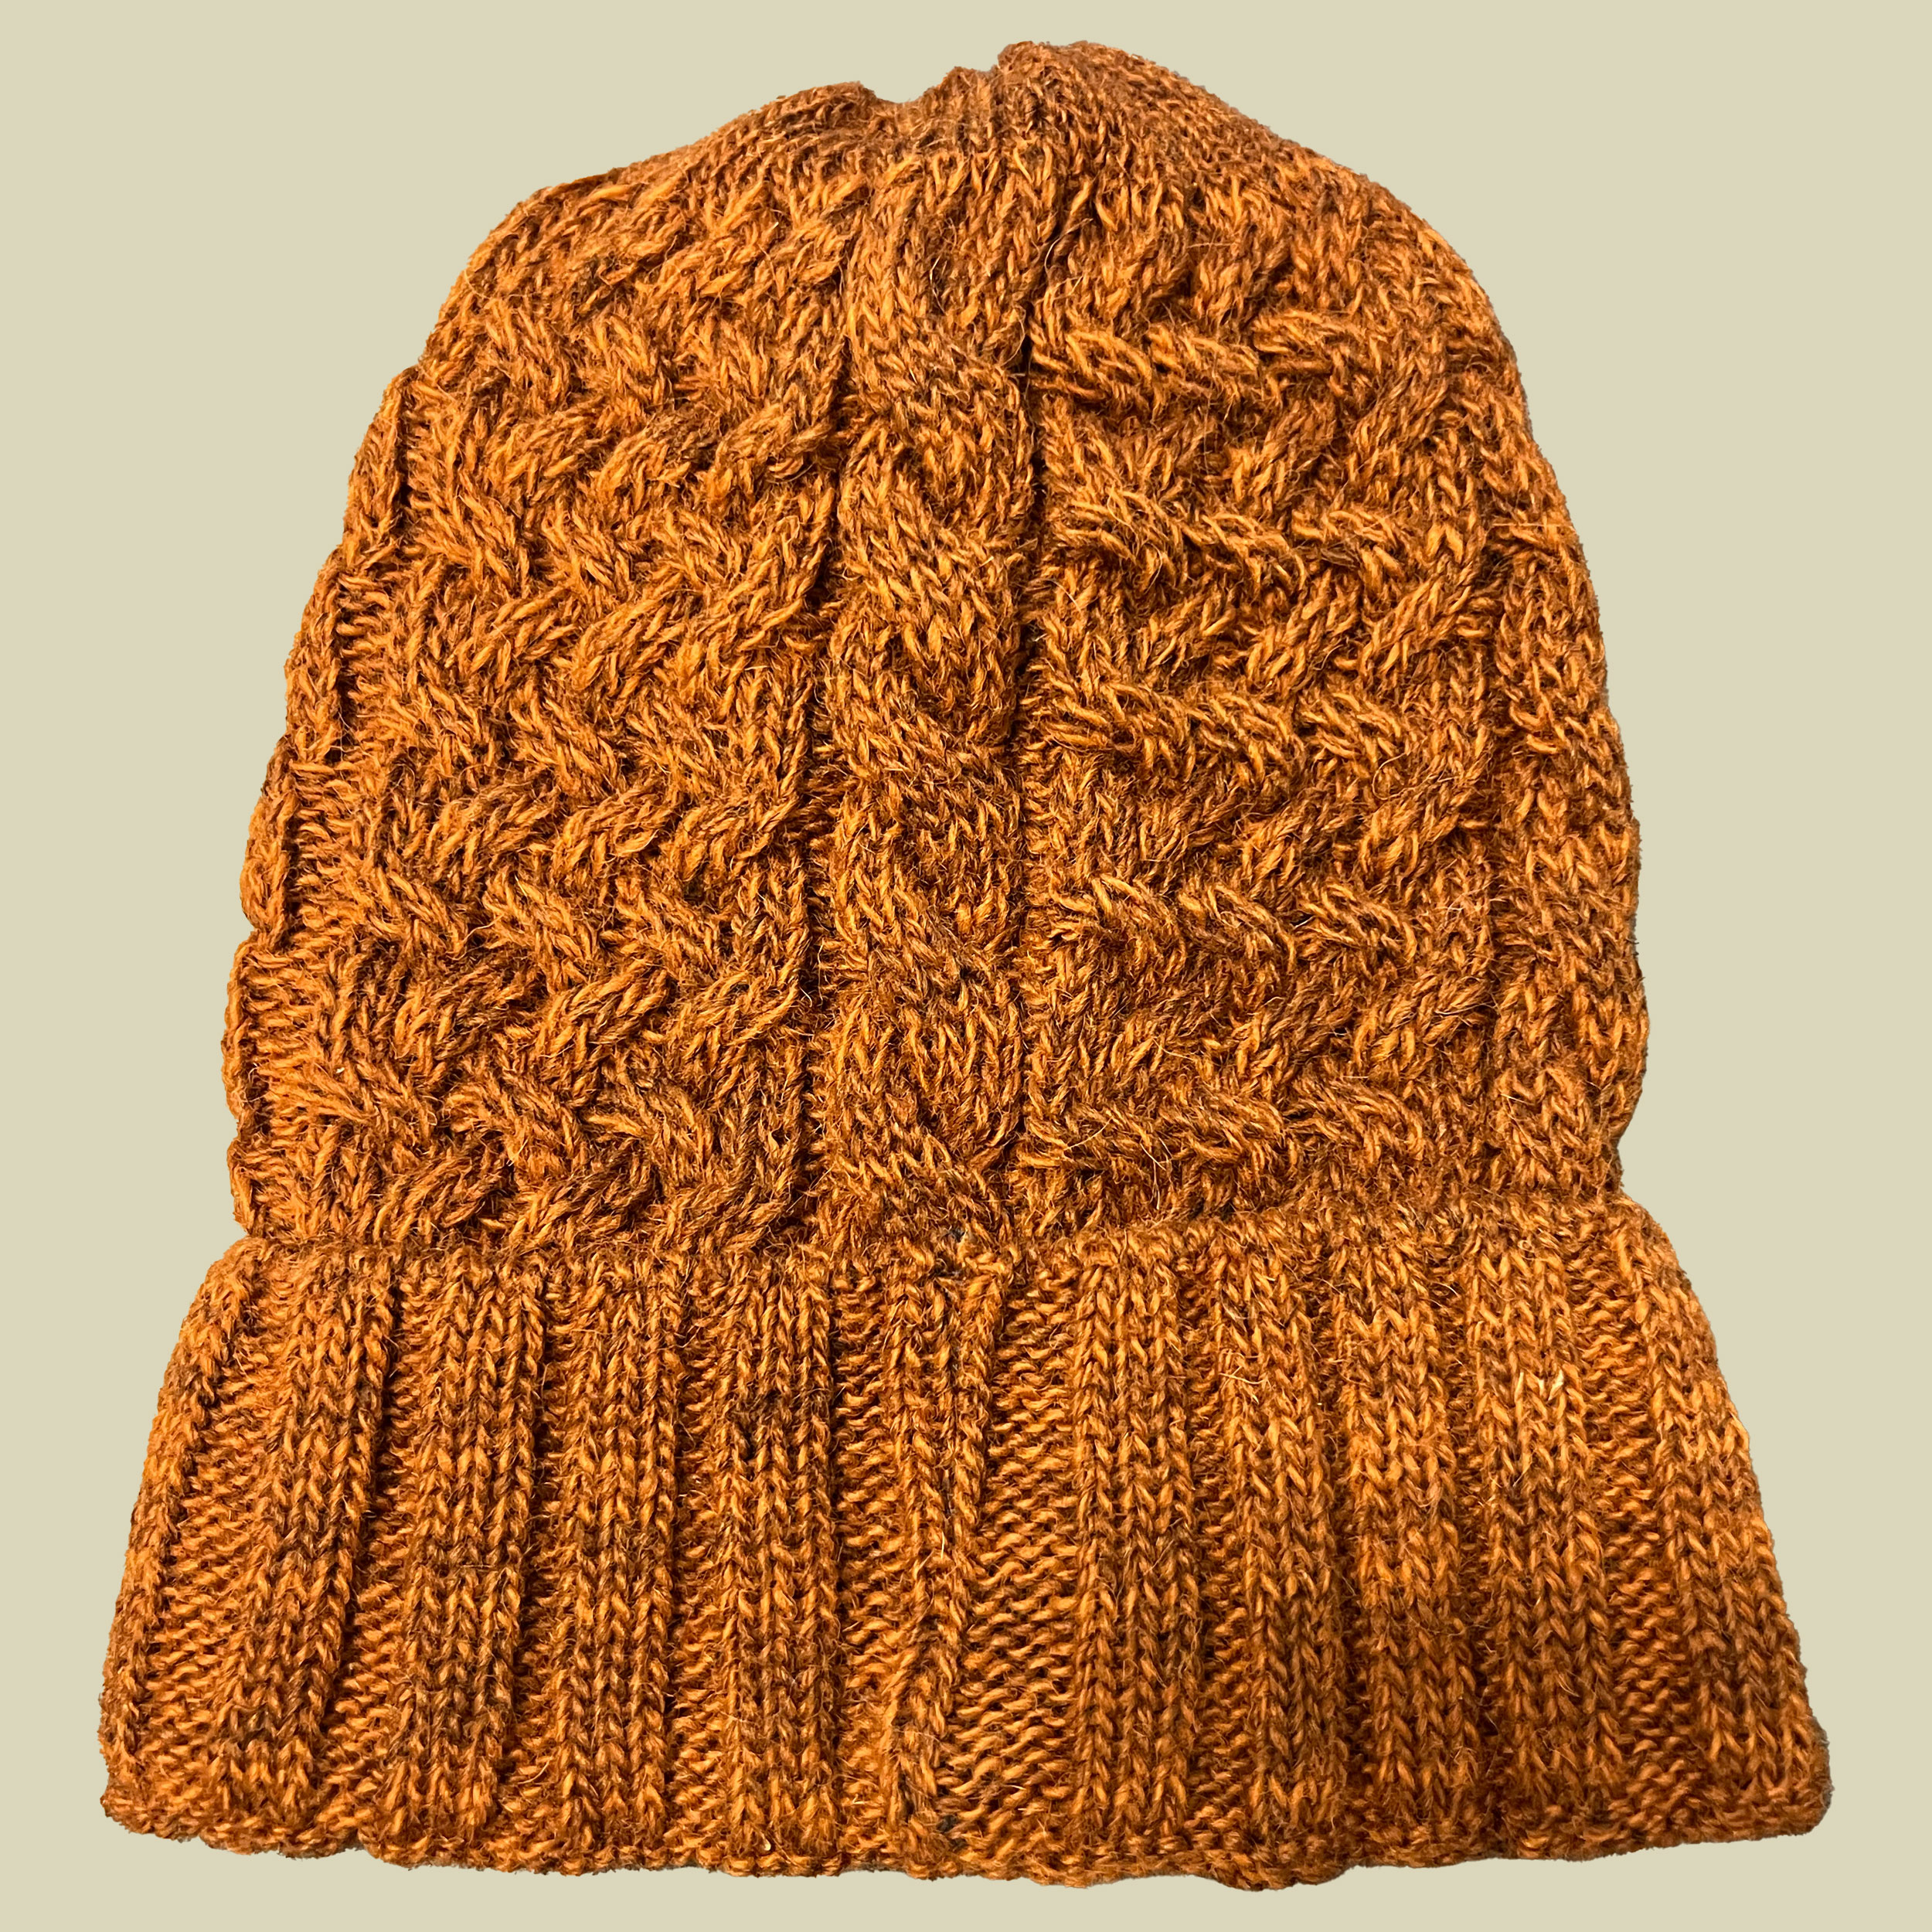 Cable Knit Hat Größe one size Farbe braun